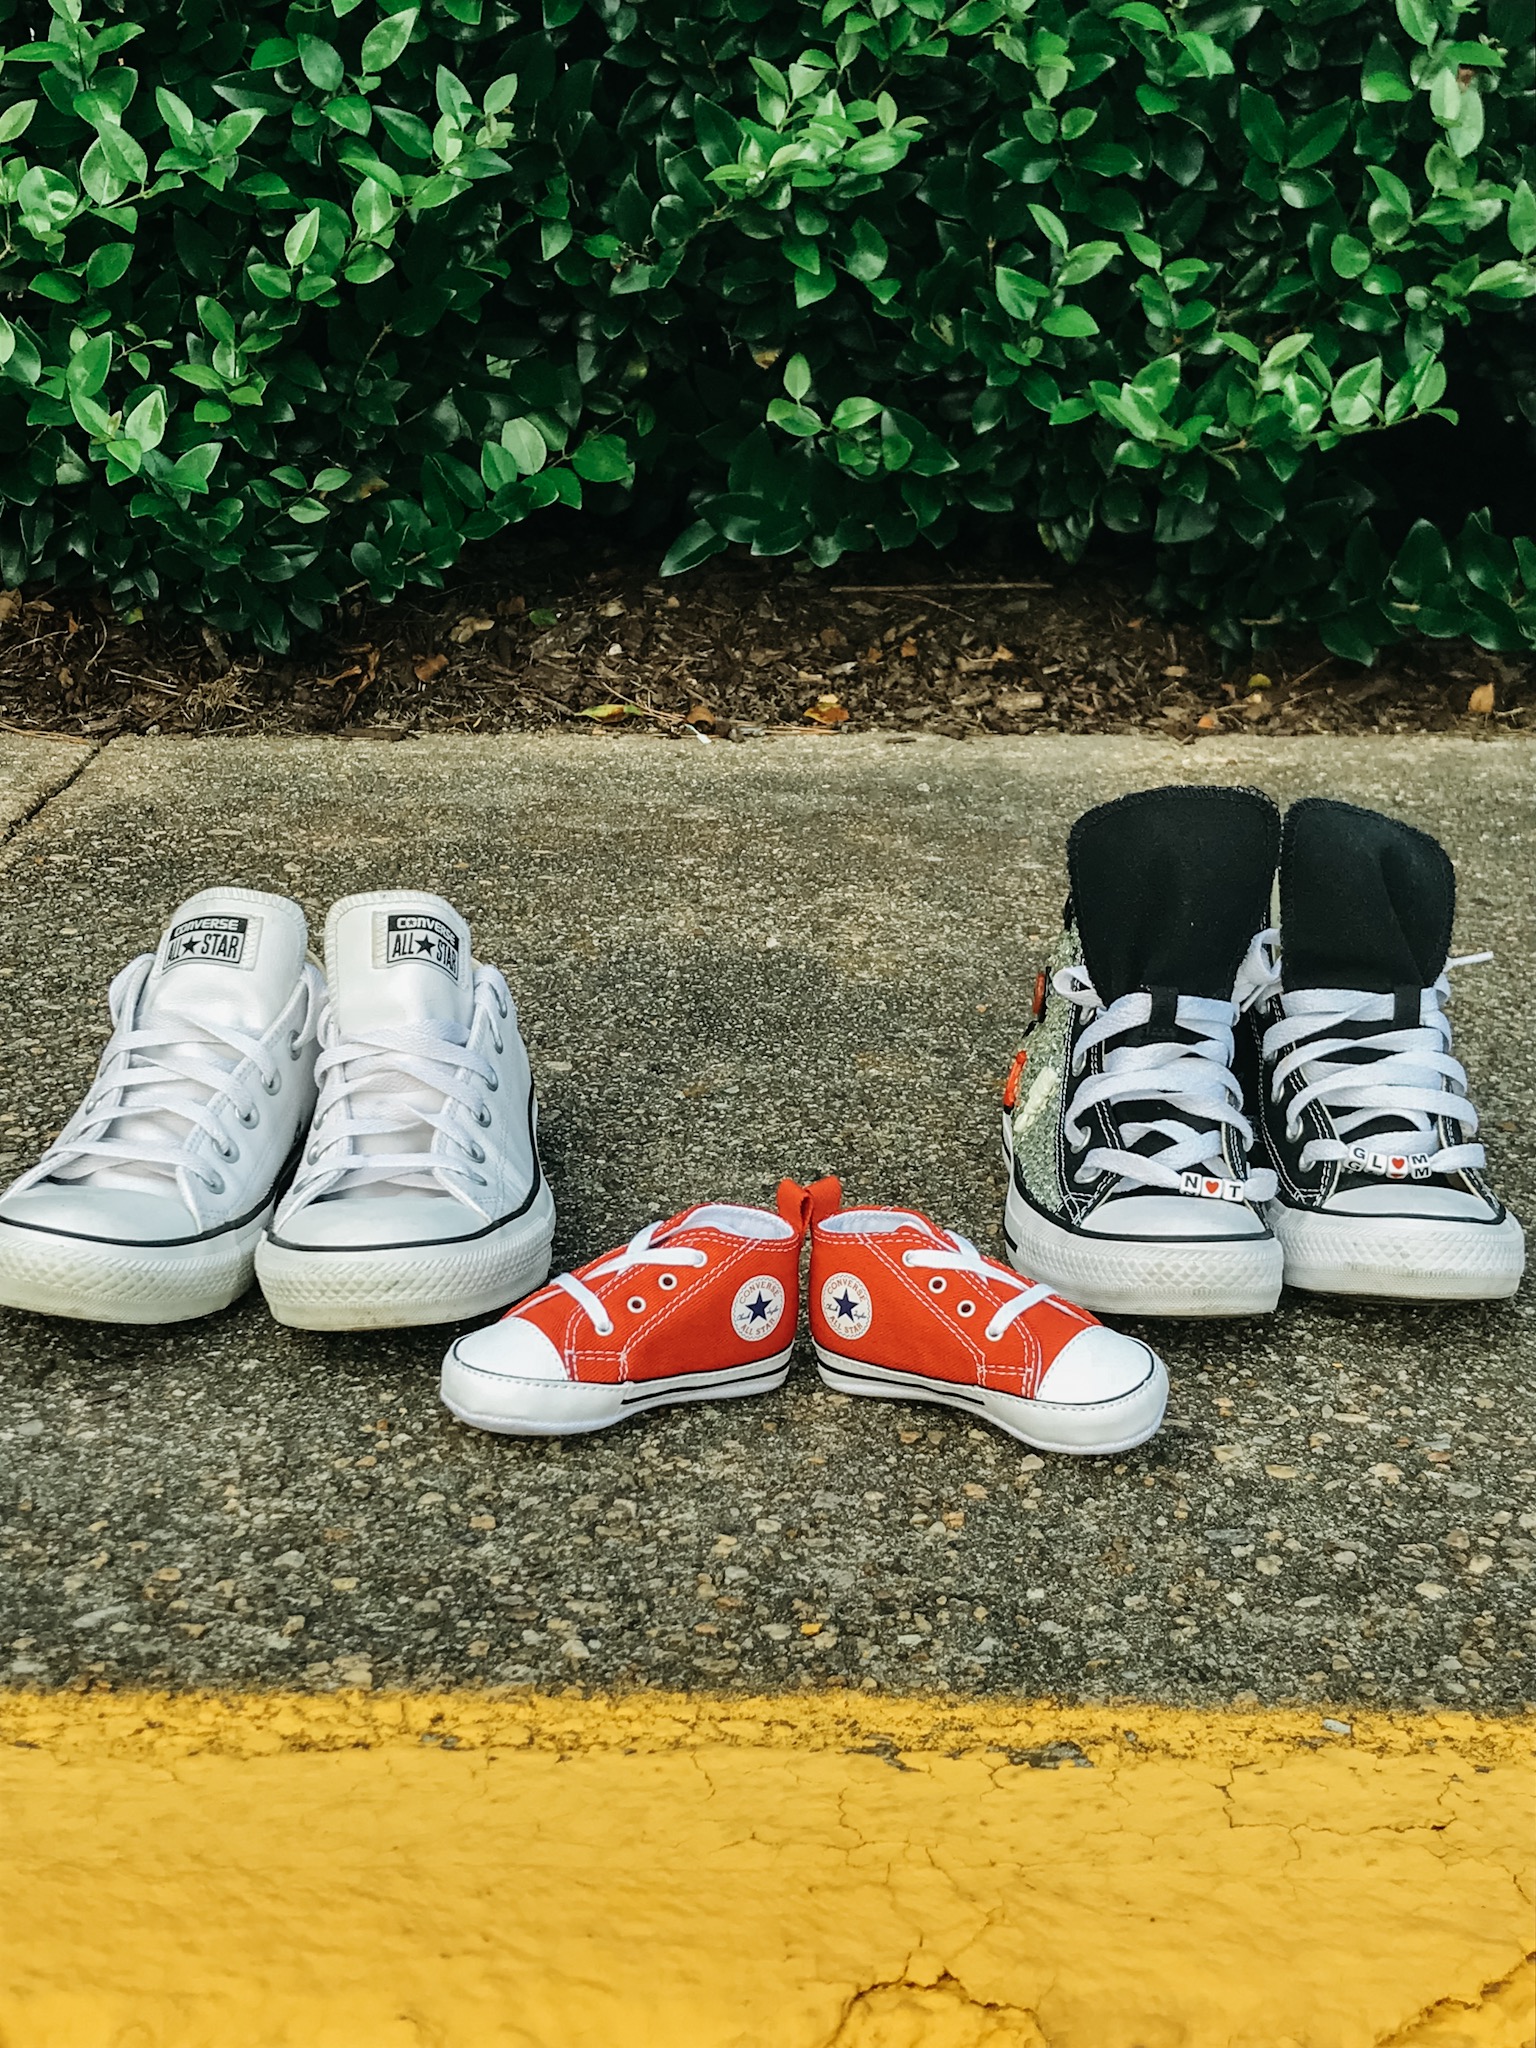 pregnancy announcement with converse, first trimester symptoms